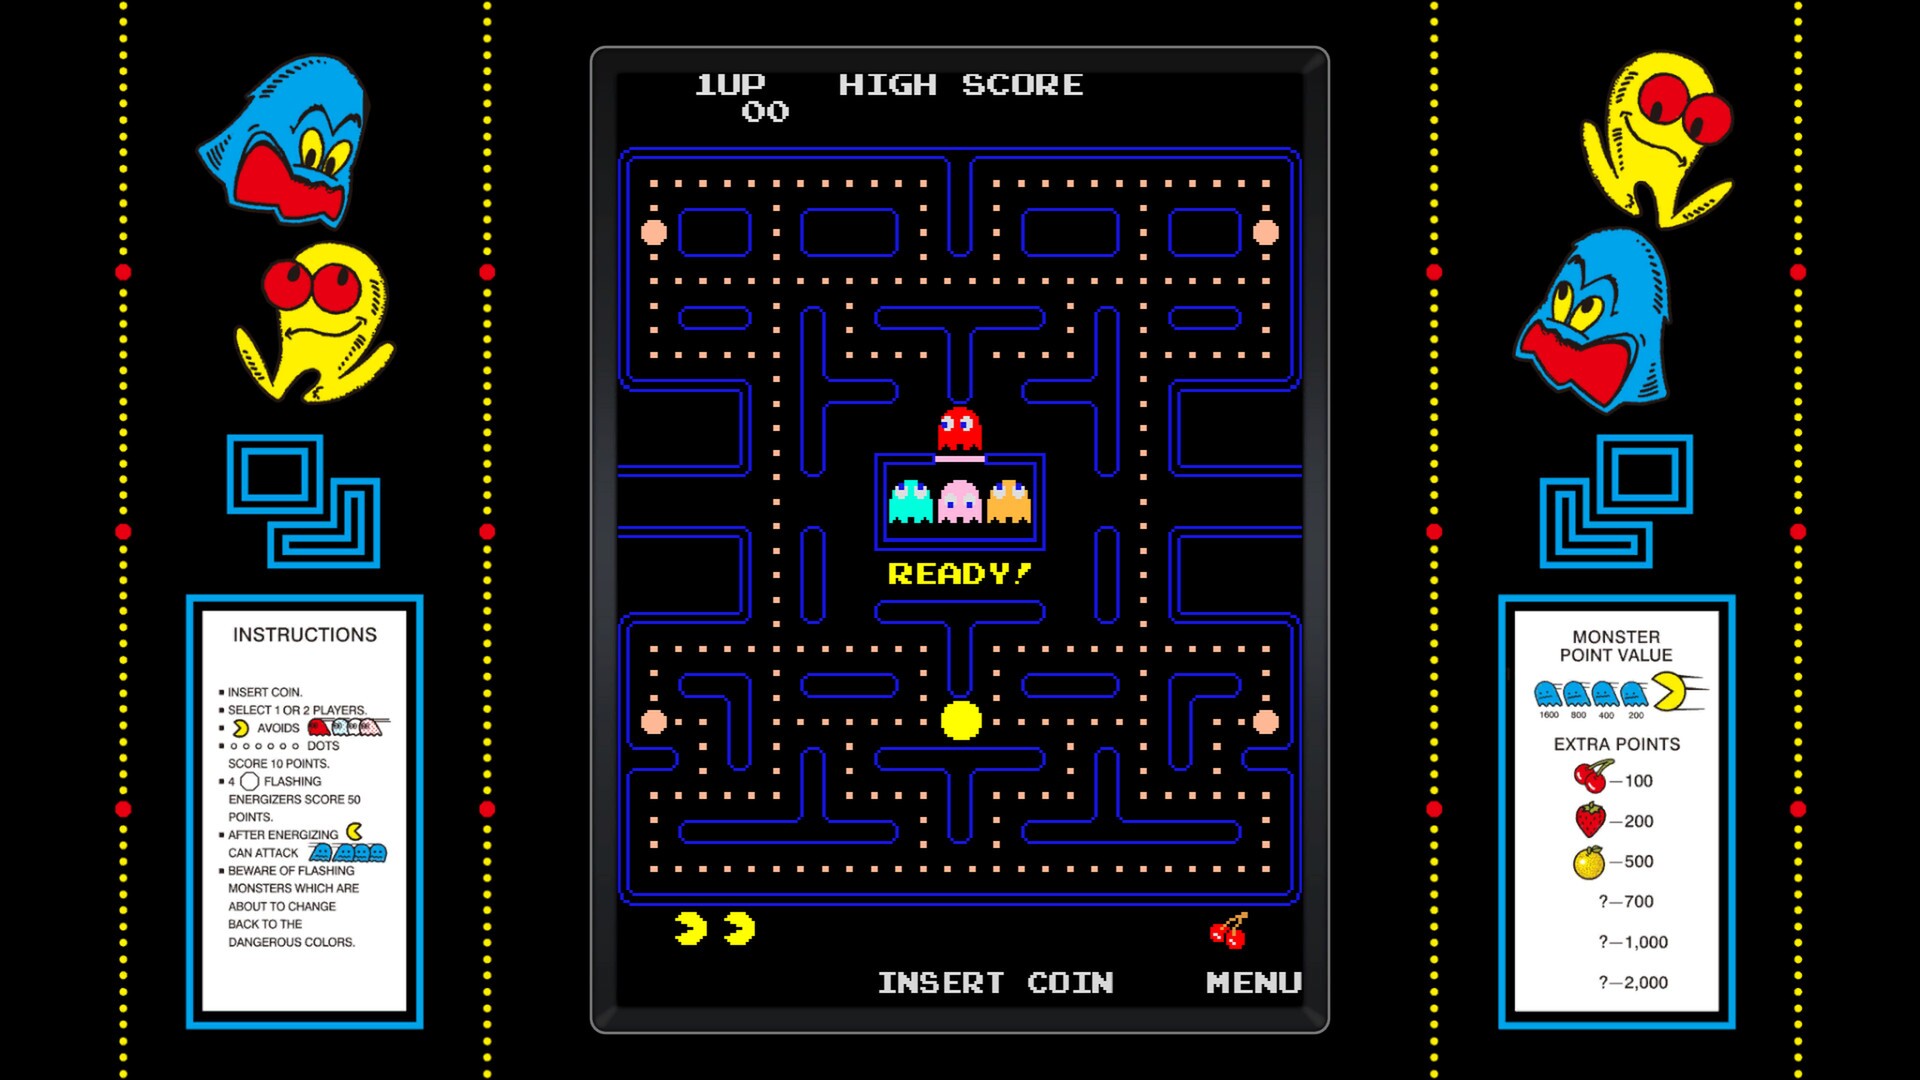 Get Your Game Face On with the most Glamorous Pacman Galery on the Internet